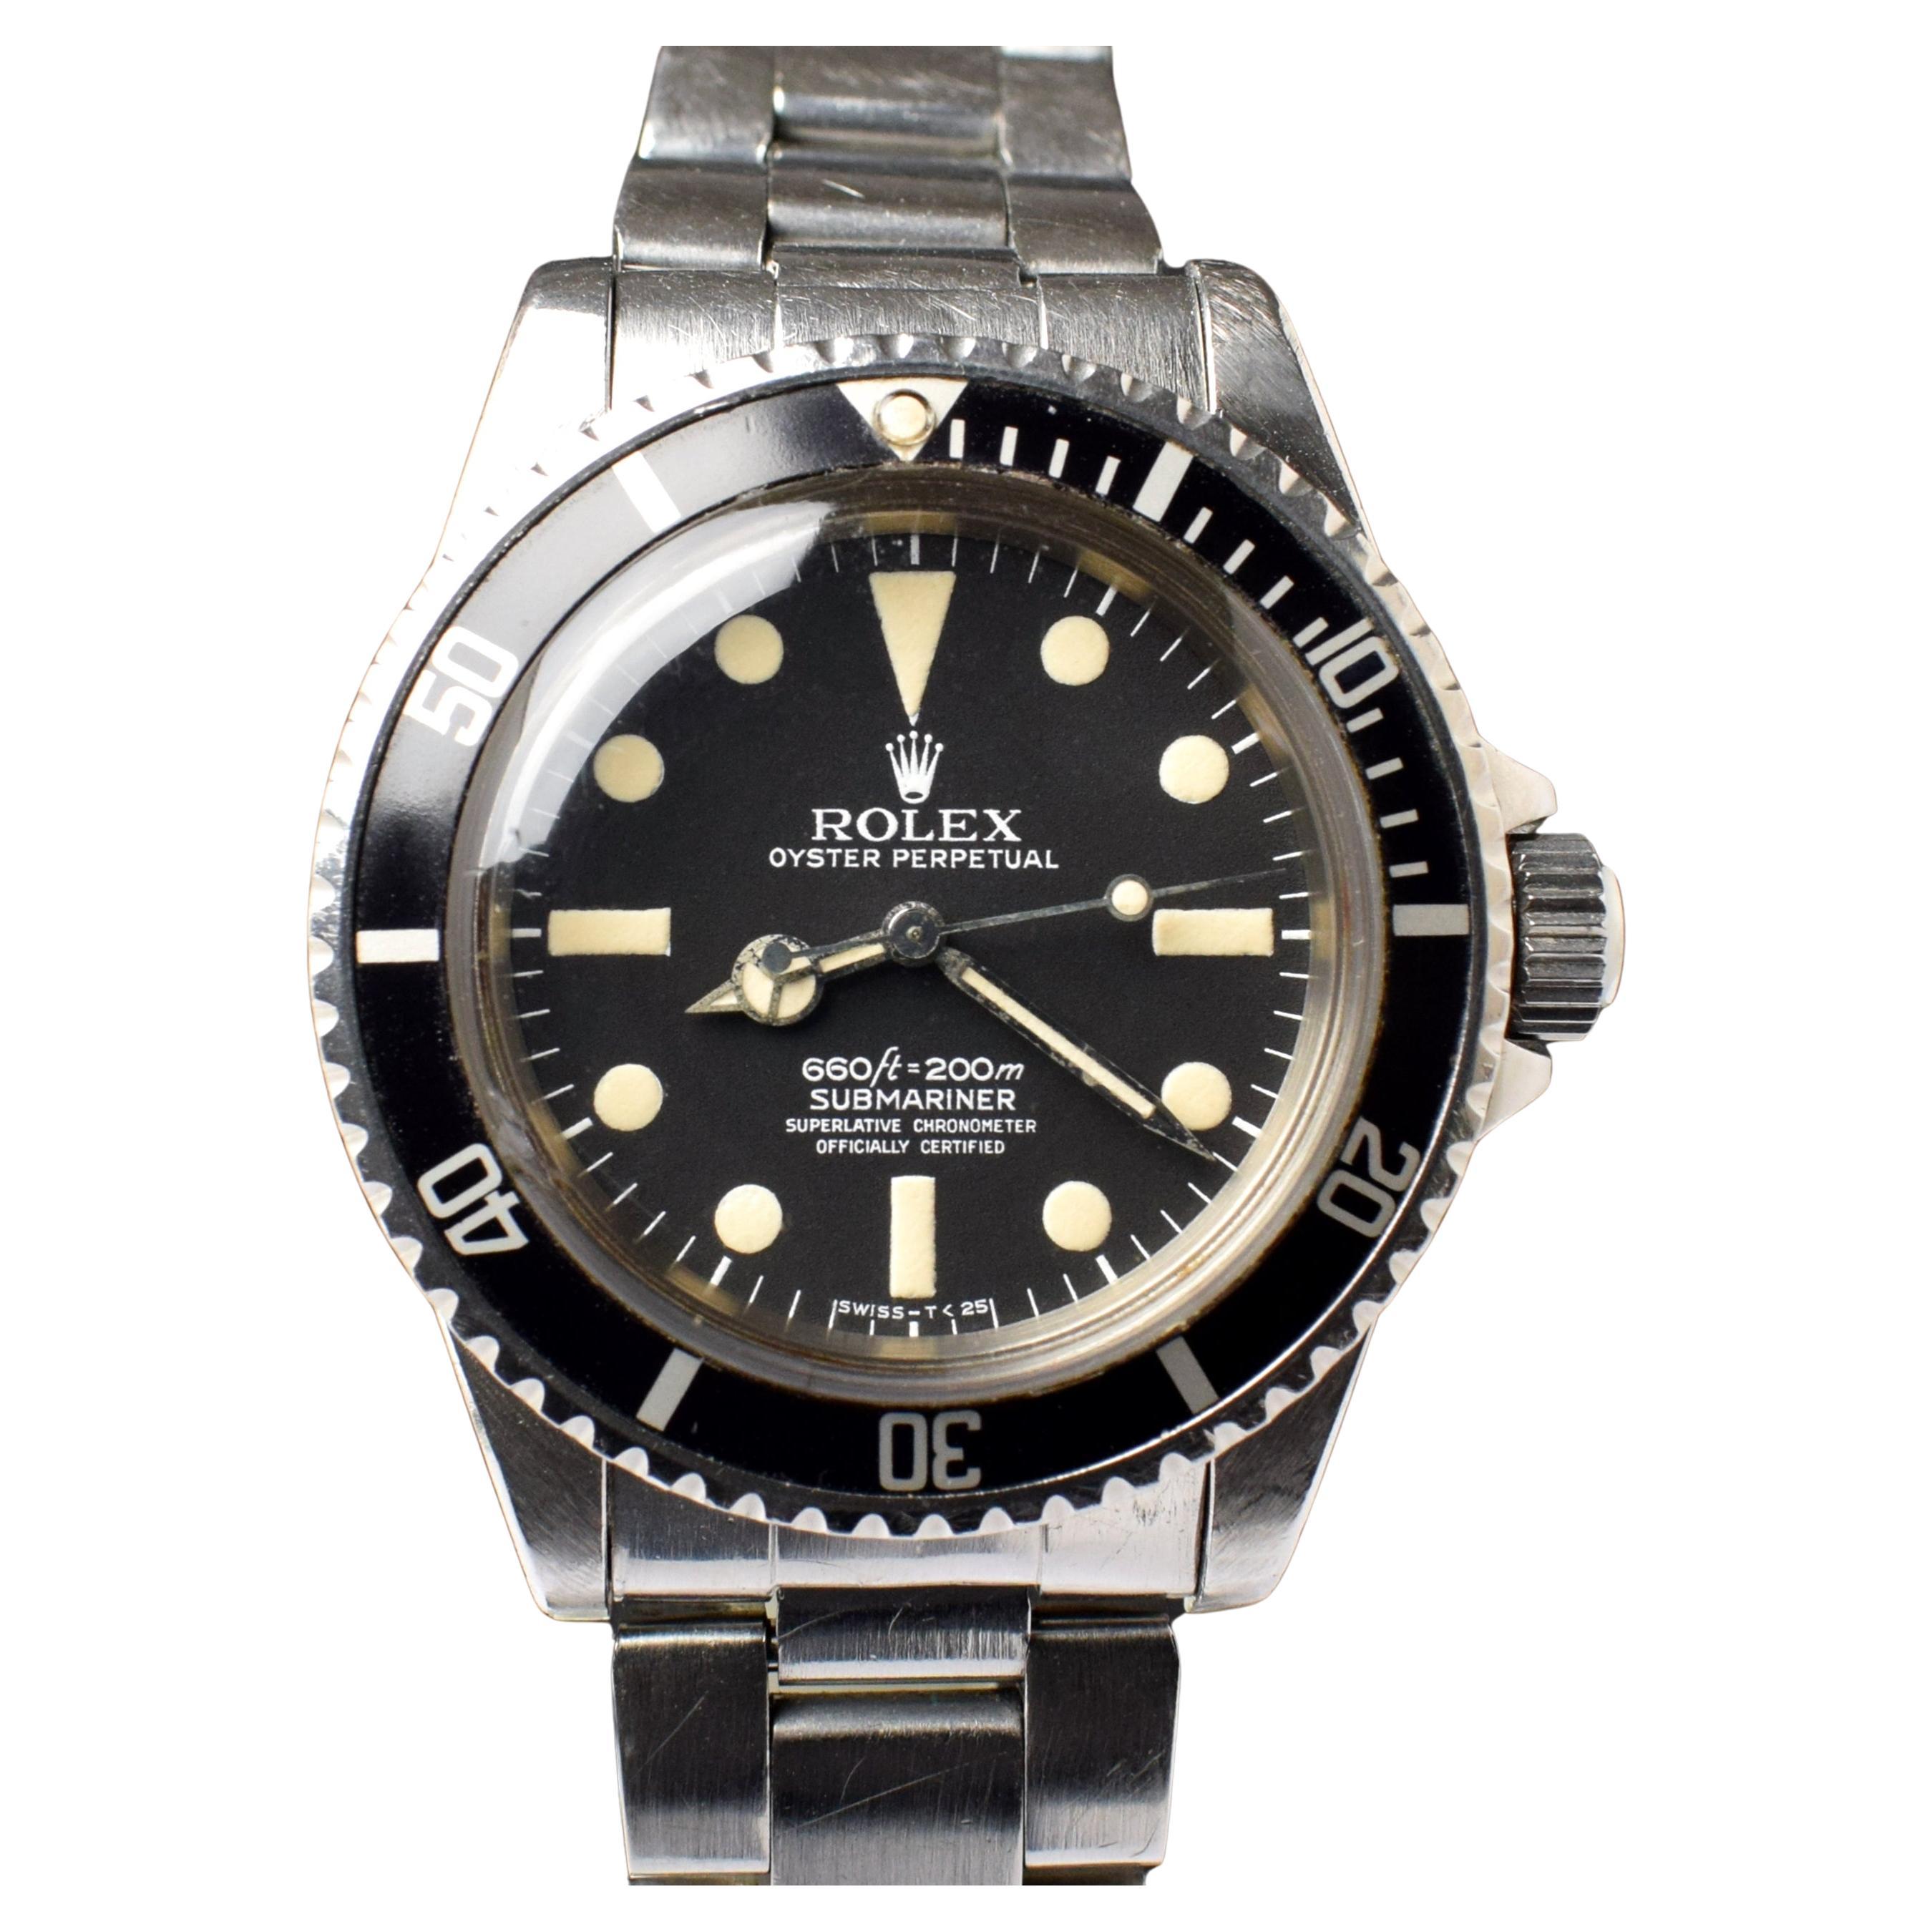 Rolex Submariner Tropical Brown Glossy Gilt Dial 5512 Steel Automatic Watch 1960 For Sale 1stDibs | rolex submariner 1960, rolex brown, che guevara rolex